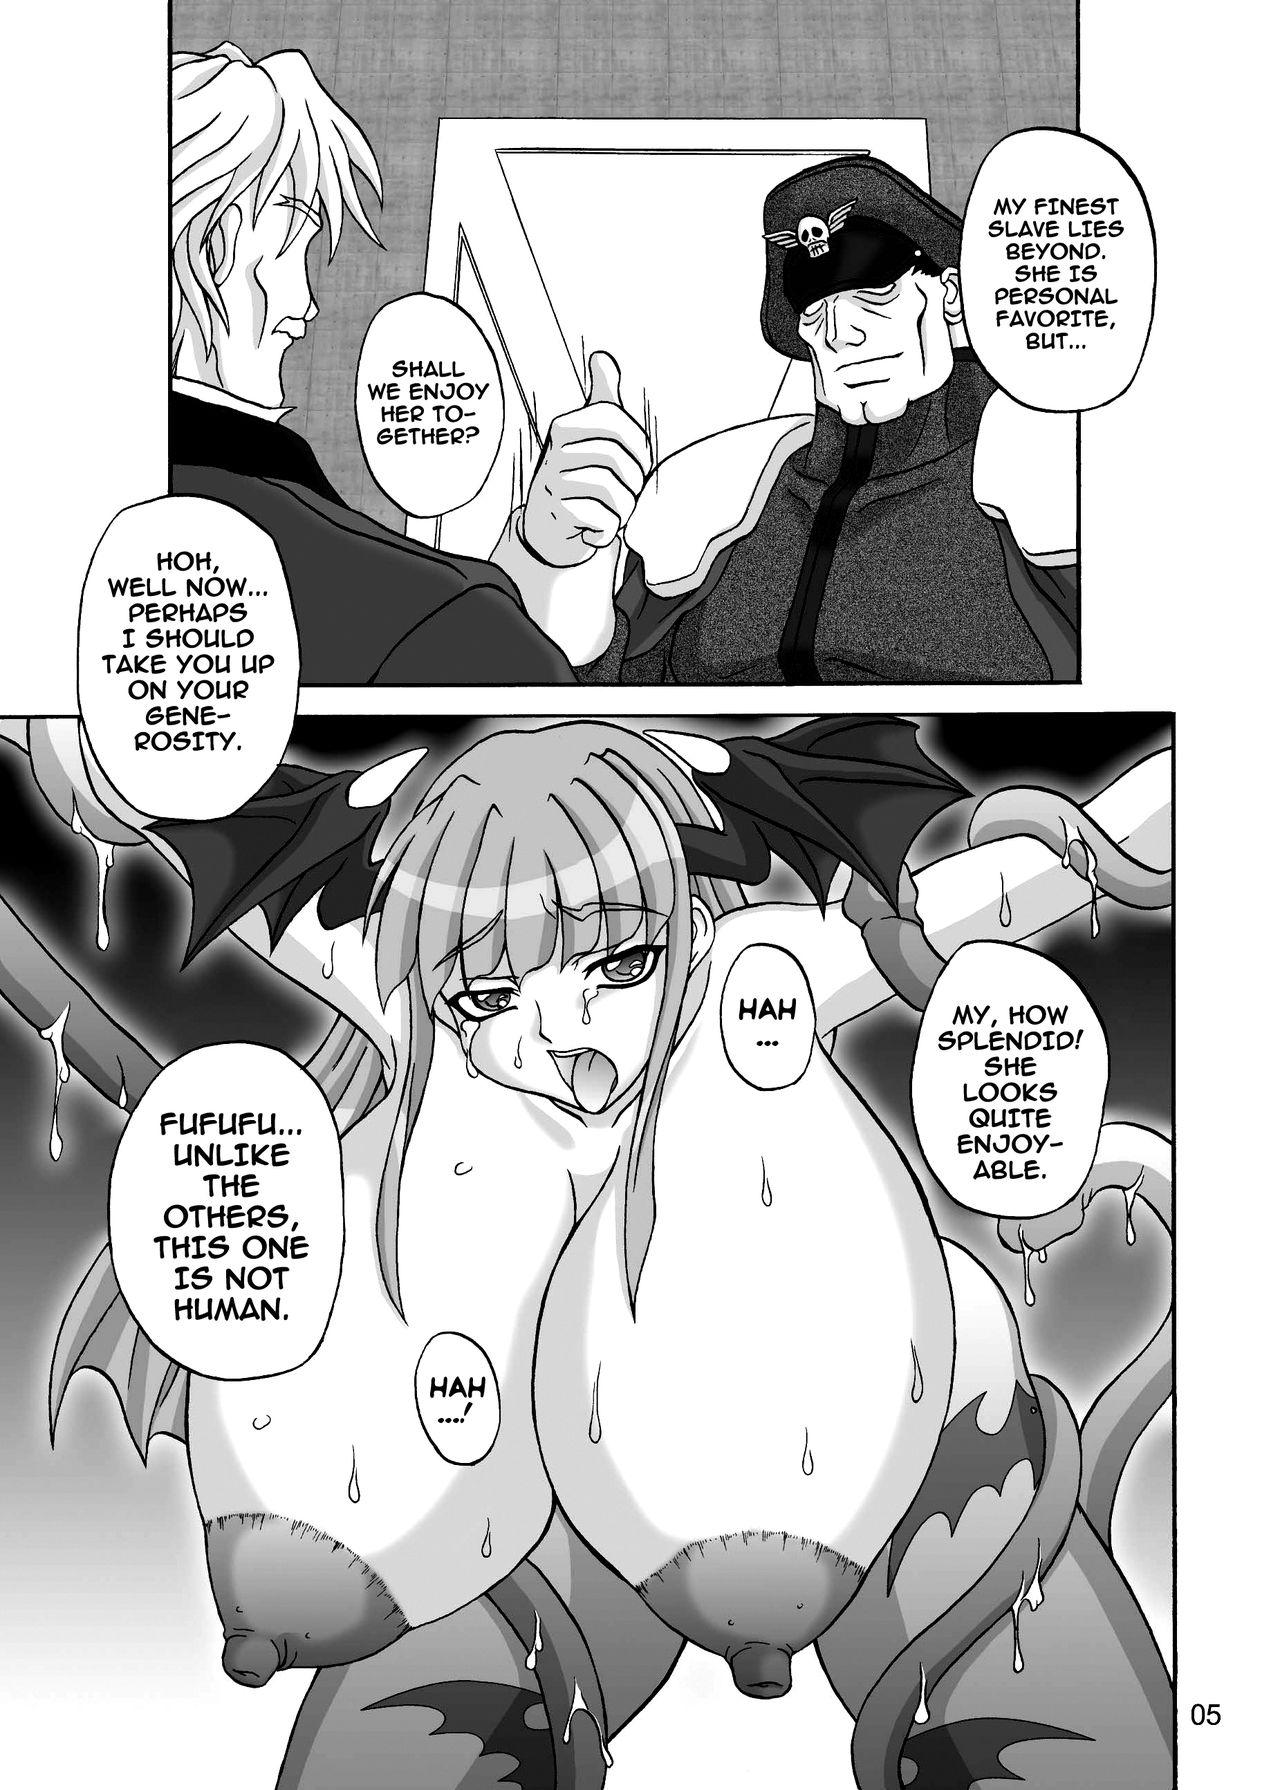 Chudai Insanity 2 - King of fighters Darkstalkers Women - Page 4